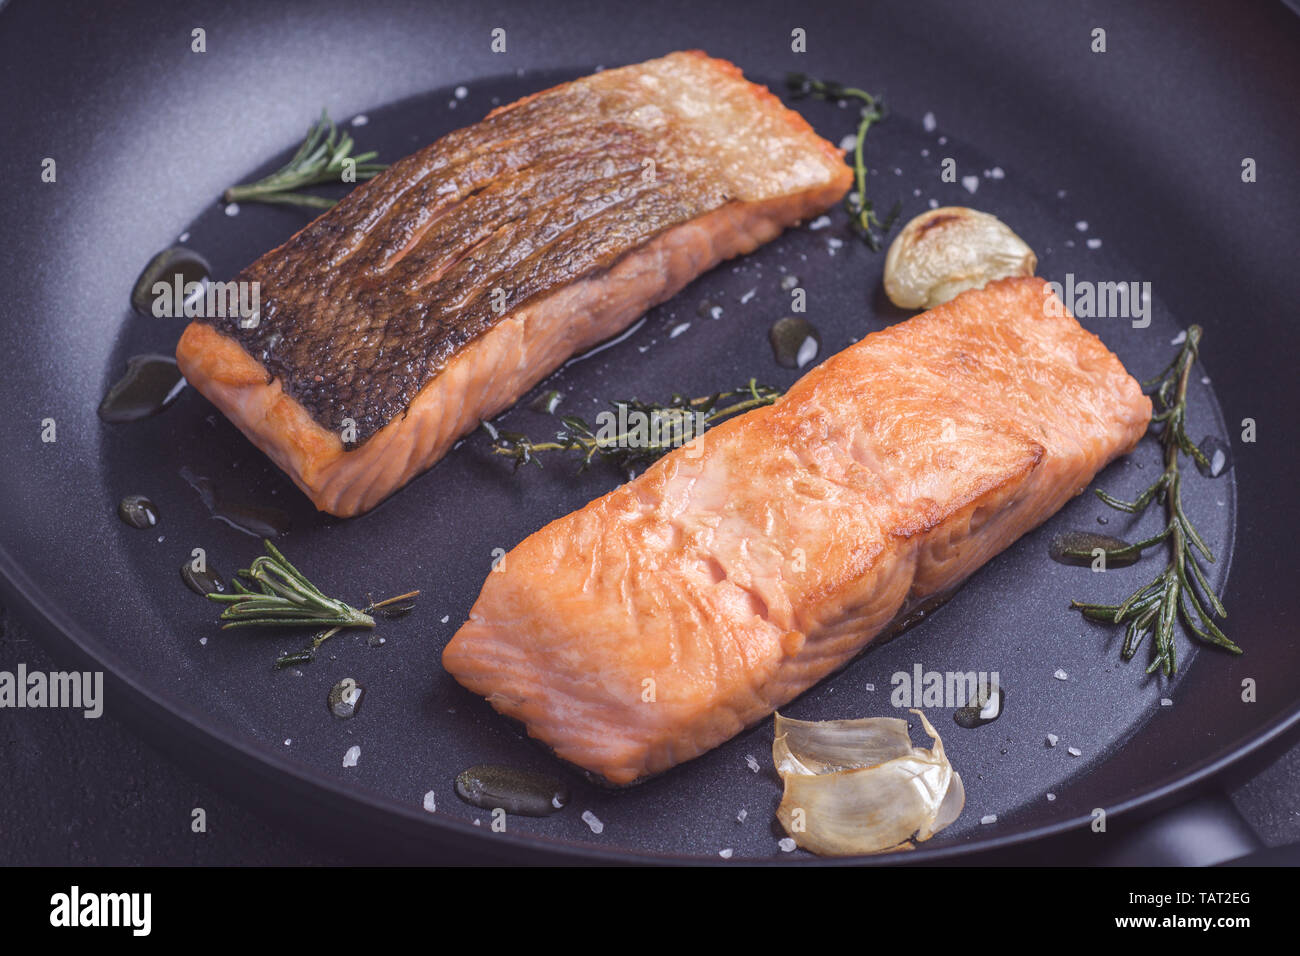 Grilled Salmon Fillets in Black Frying Pan with Rosemary and Garlic Stock Photo